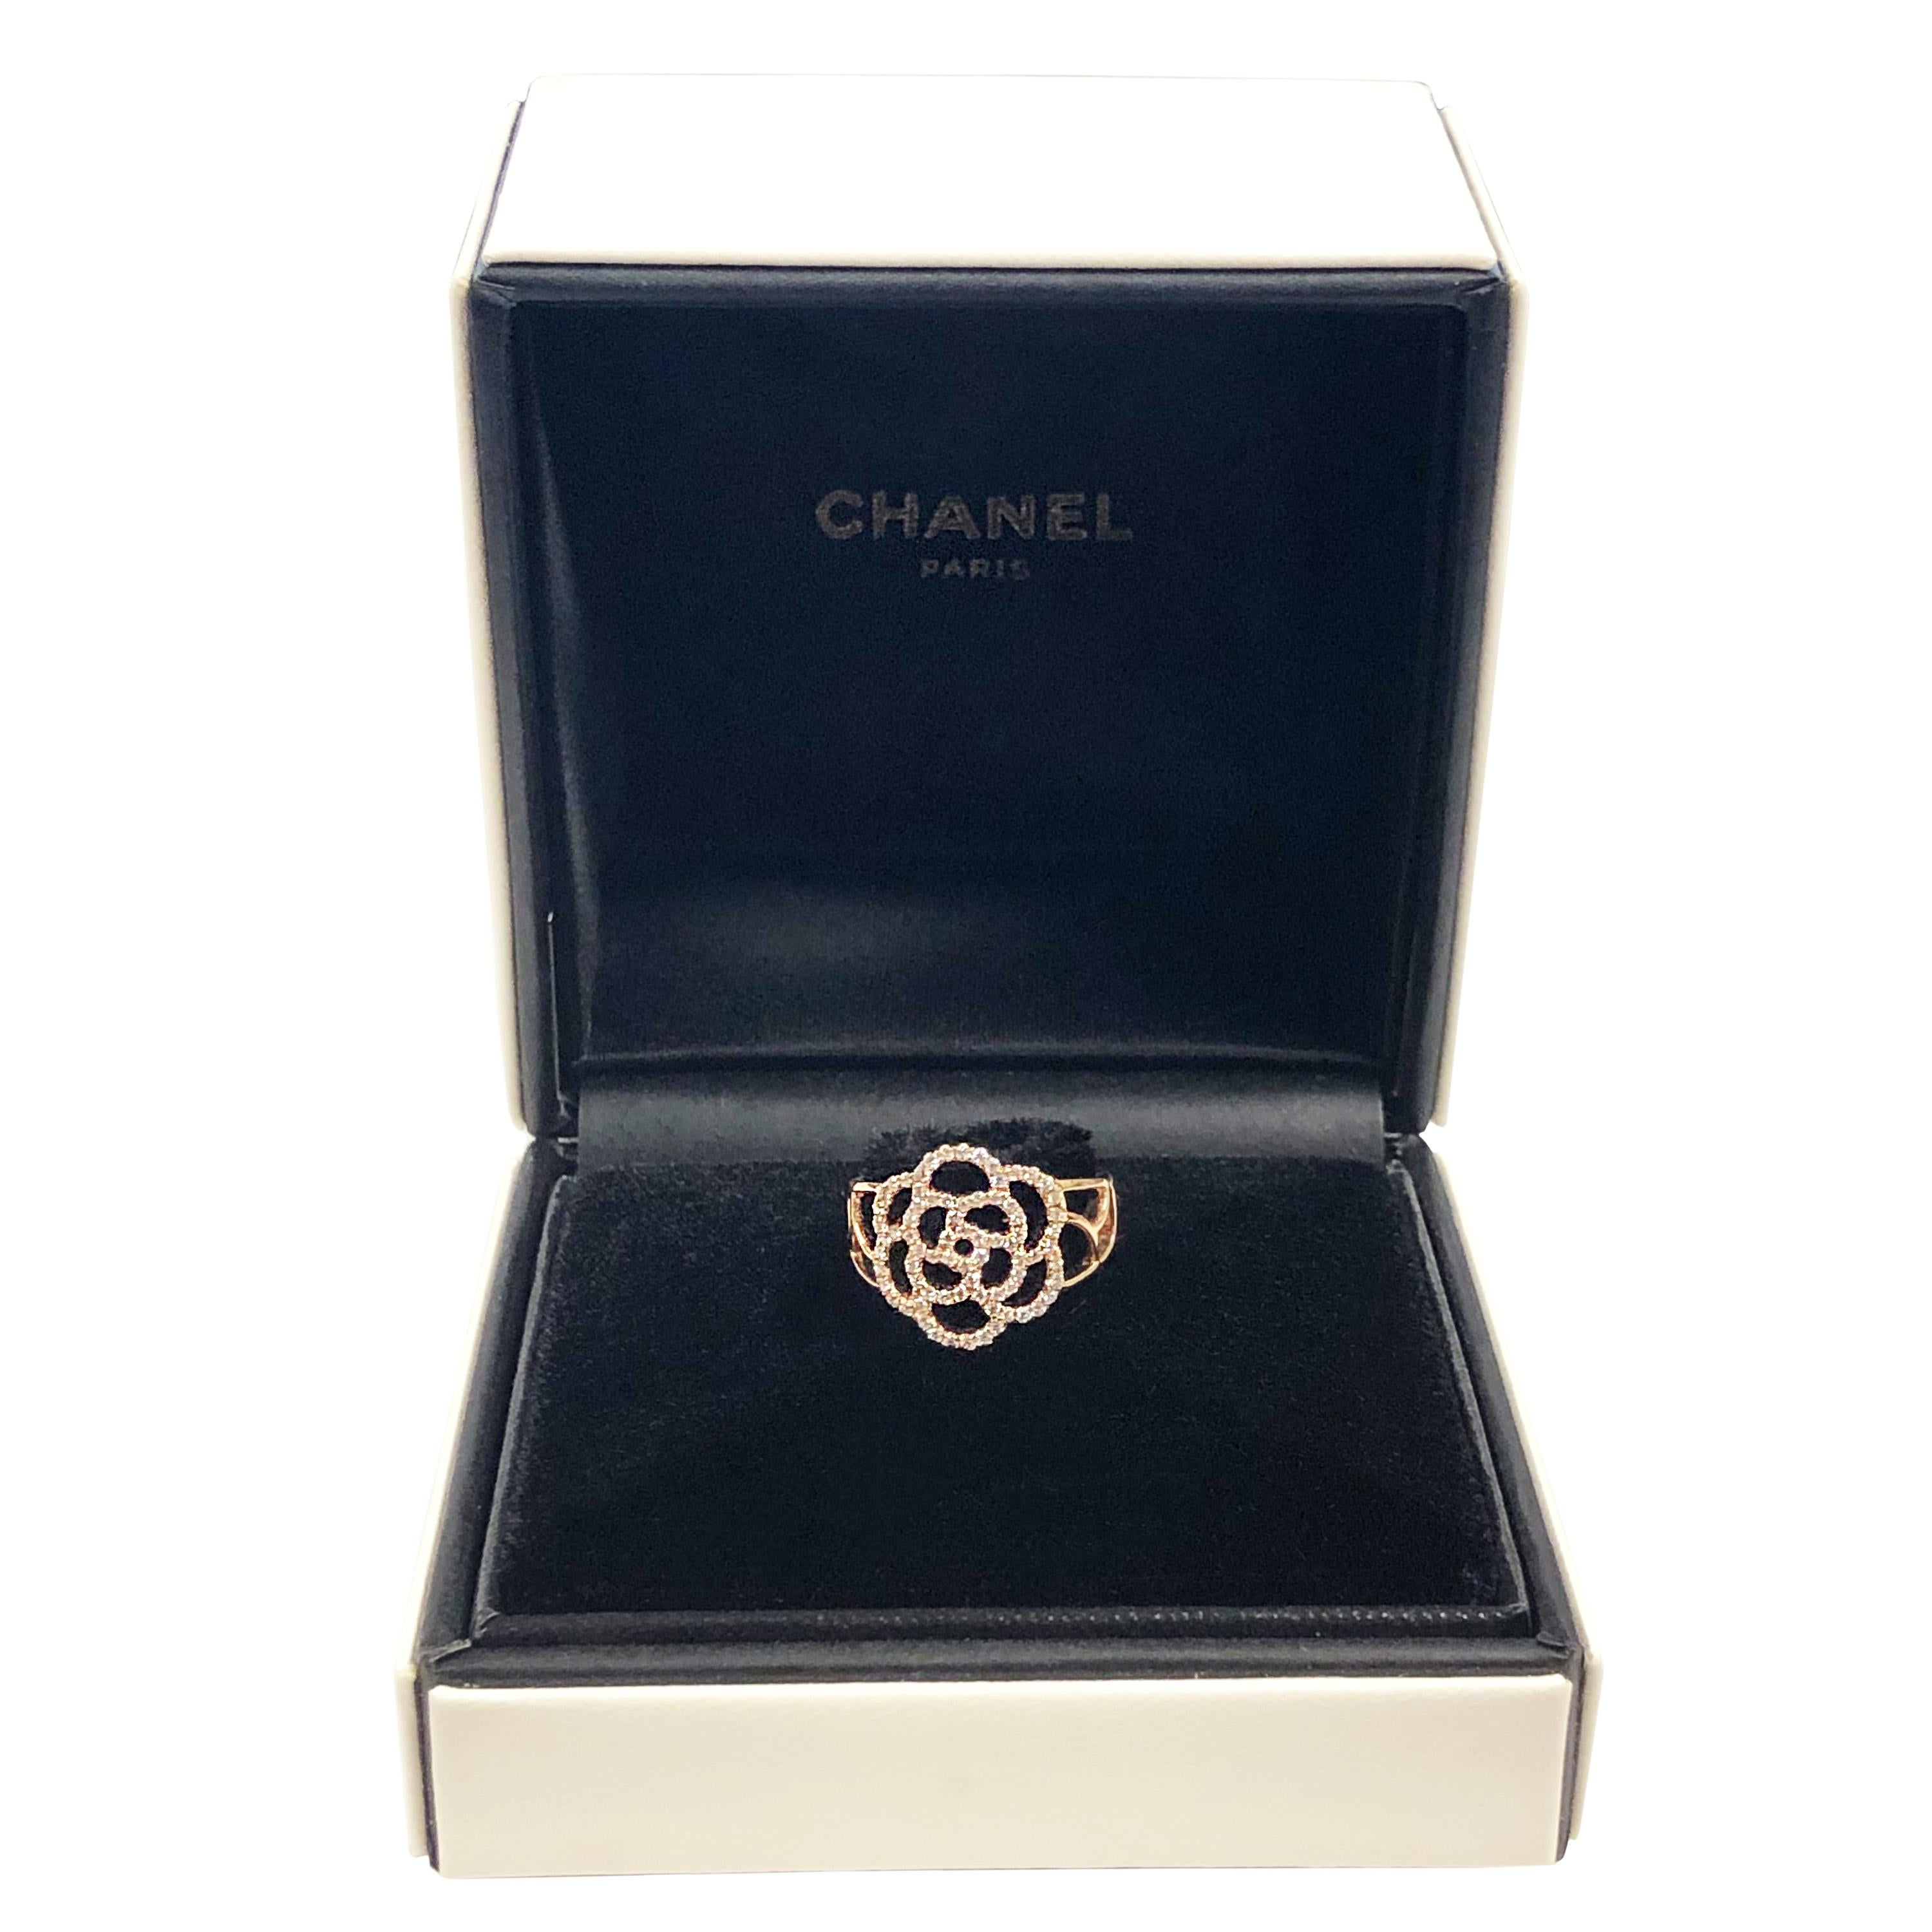 Circa 2017 Chanel Paris Camelia collection 18K Rose Gold Ring, set with Round Brilliant cut Diamonds totaling 1 Carat. The top of the Ring measures 5/8 inch across, finger size 6 ( 52 European ) Near unworn excellent condition in original